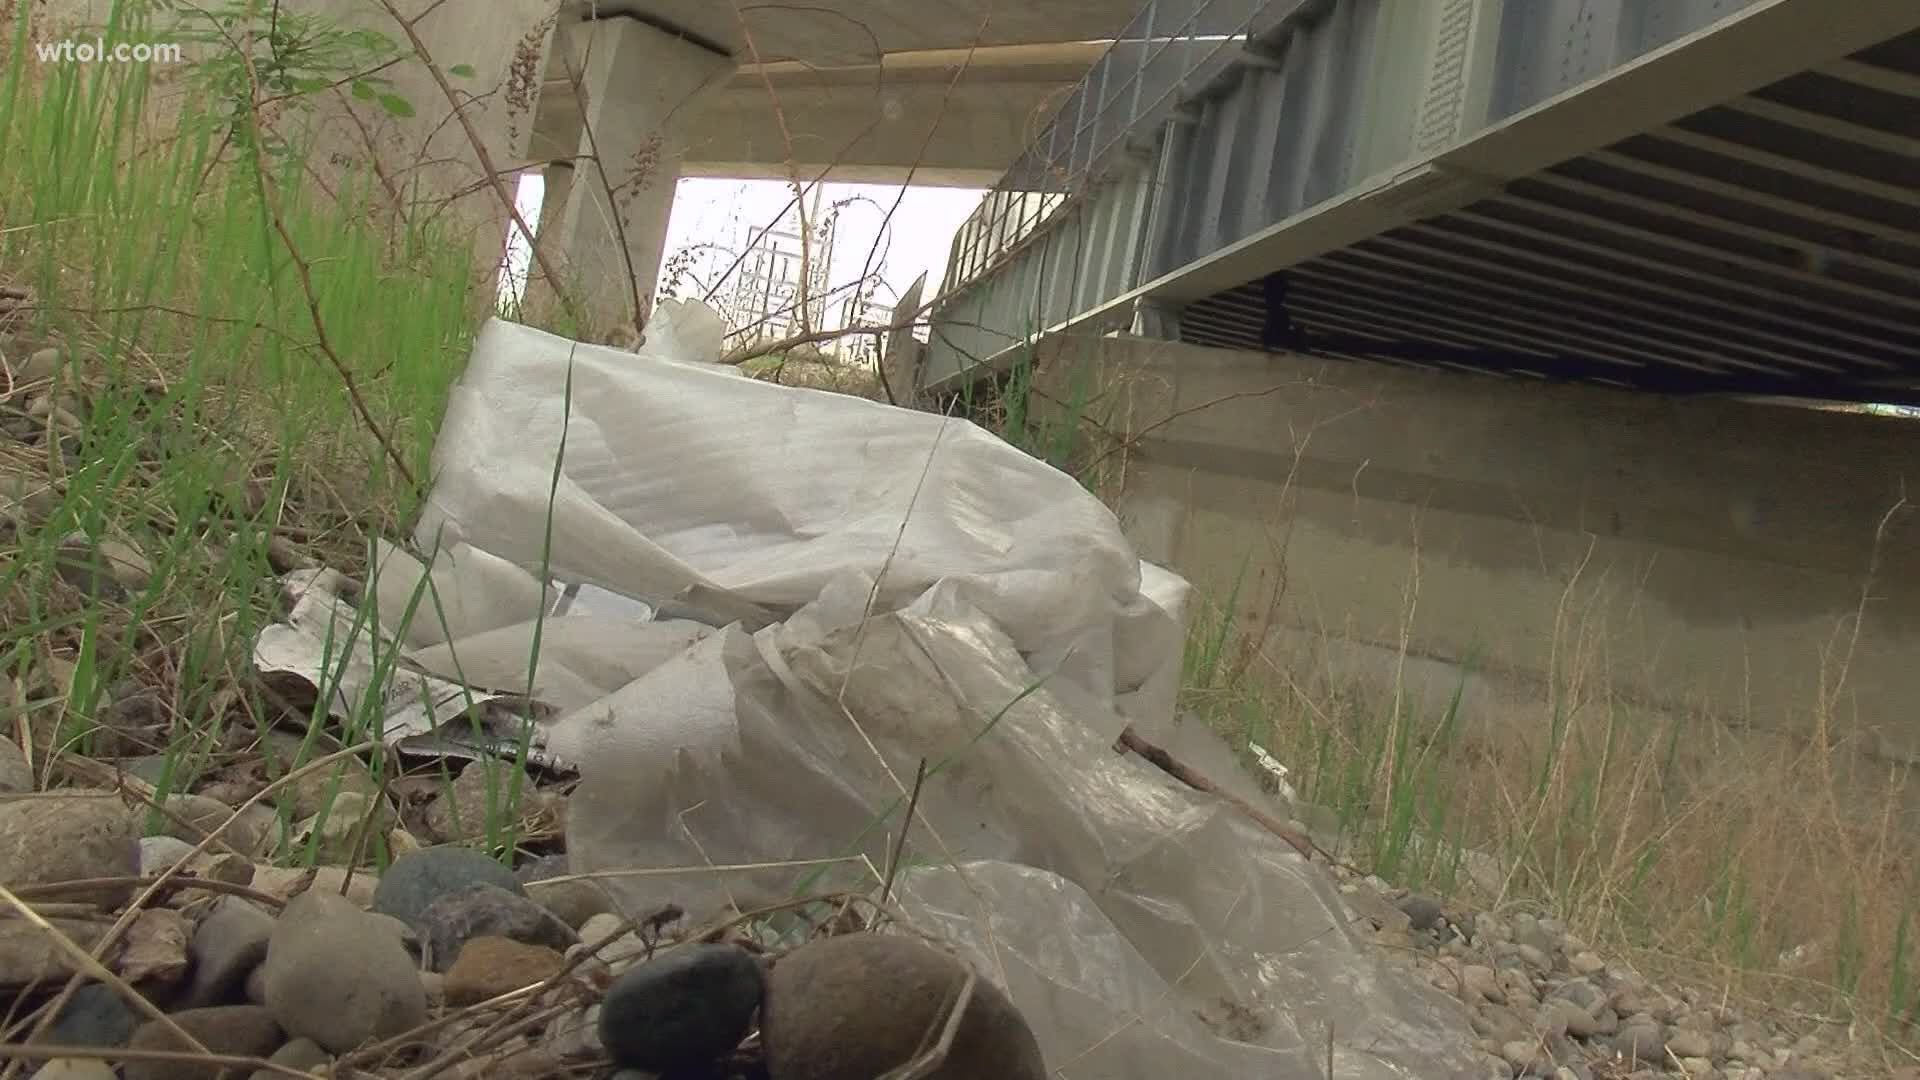 Central Toledo residents are worried about cleaning it themselves due to safety hazards, including the possibility of needles hidden in the debris.